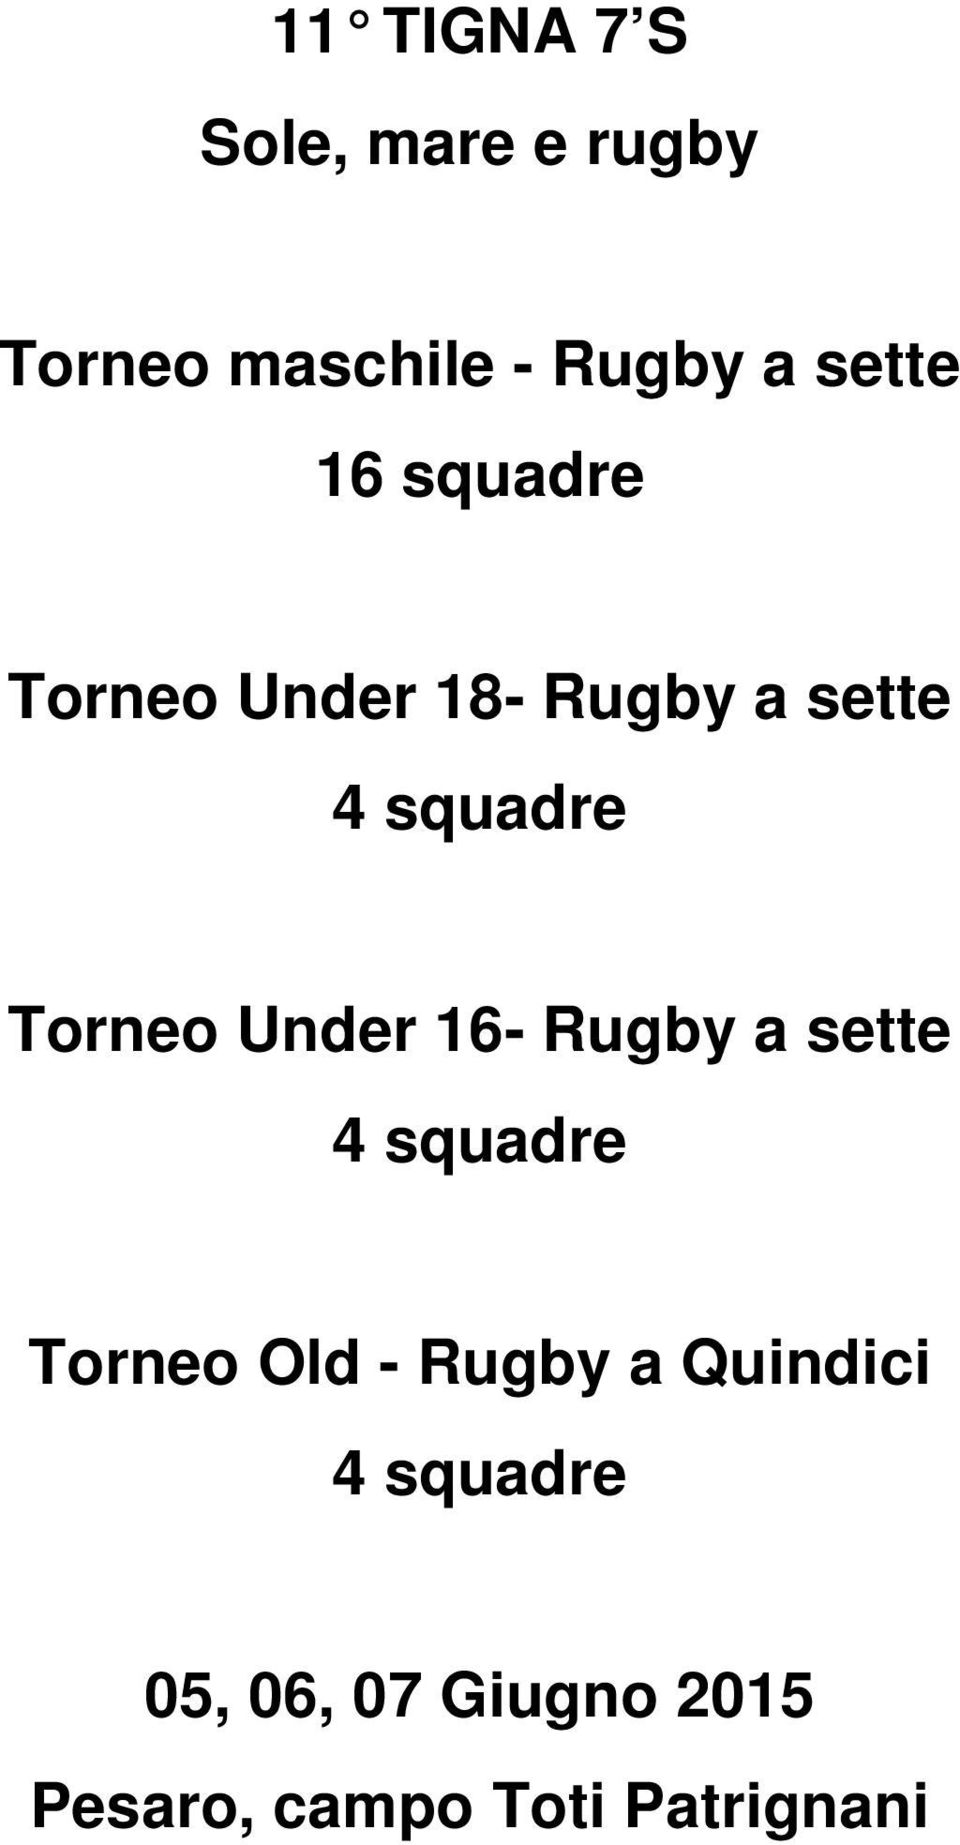 Torneo Under 16- Rugby a sette 4 squadre Torneo Old - Rugby a